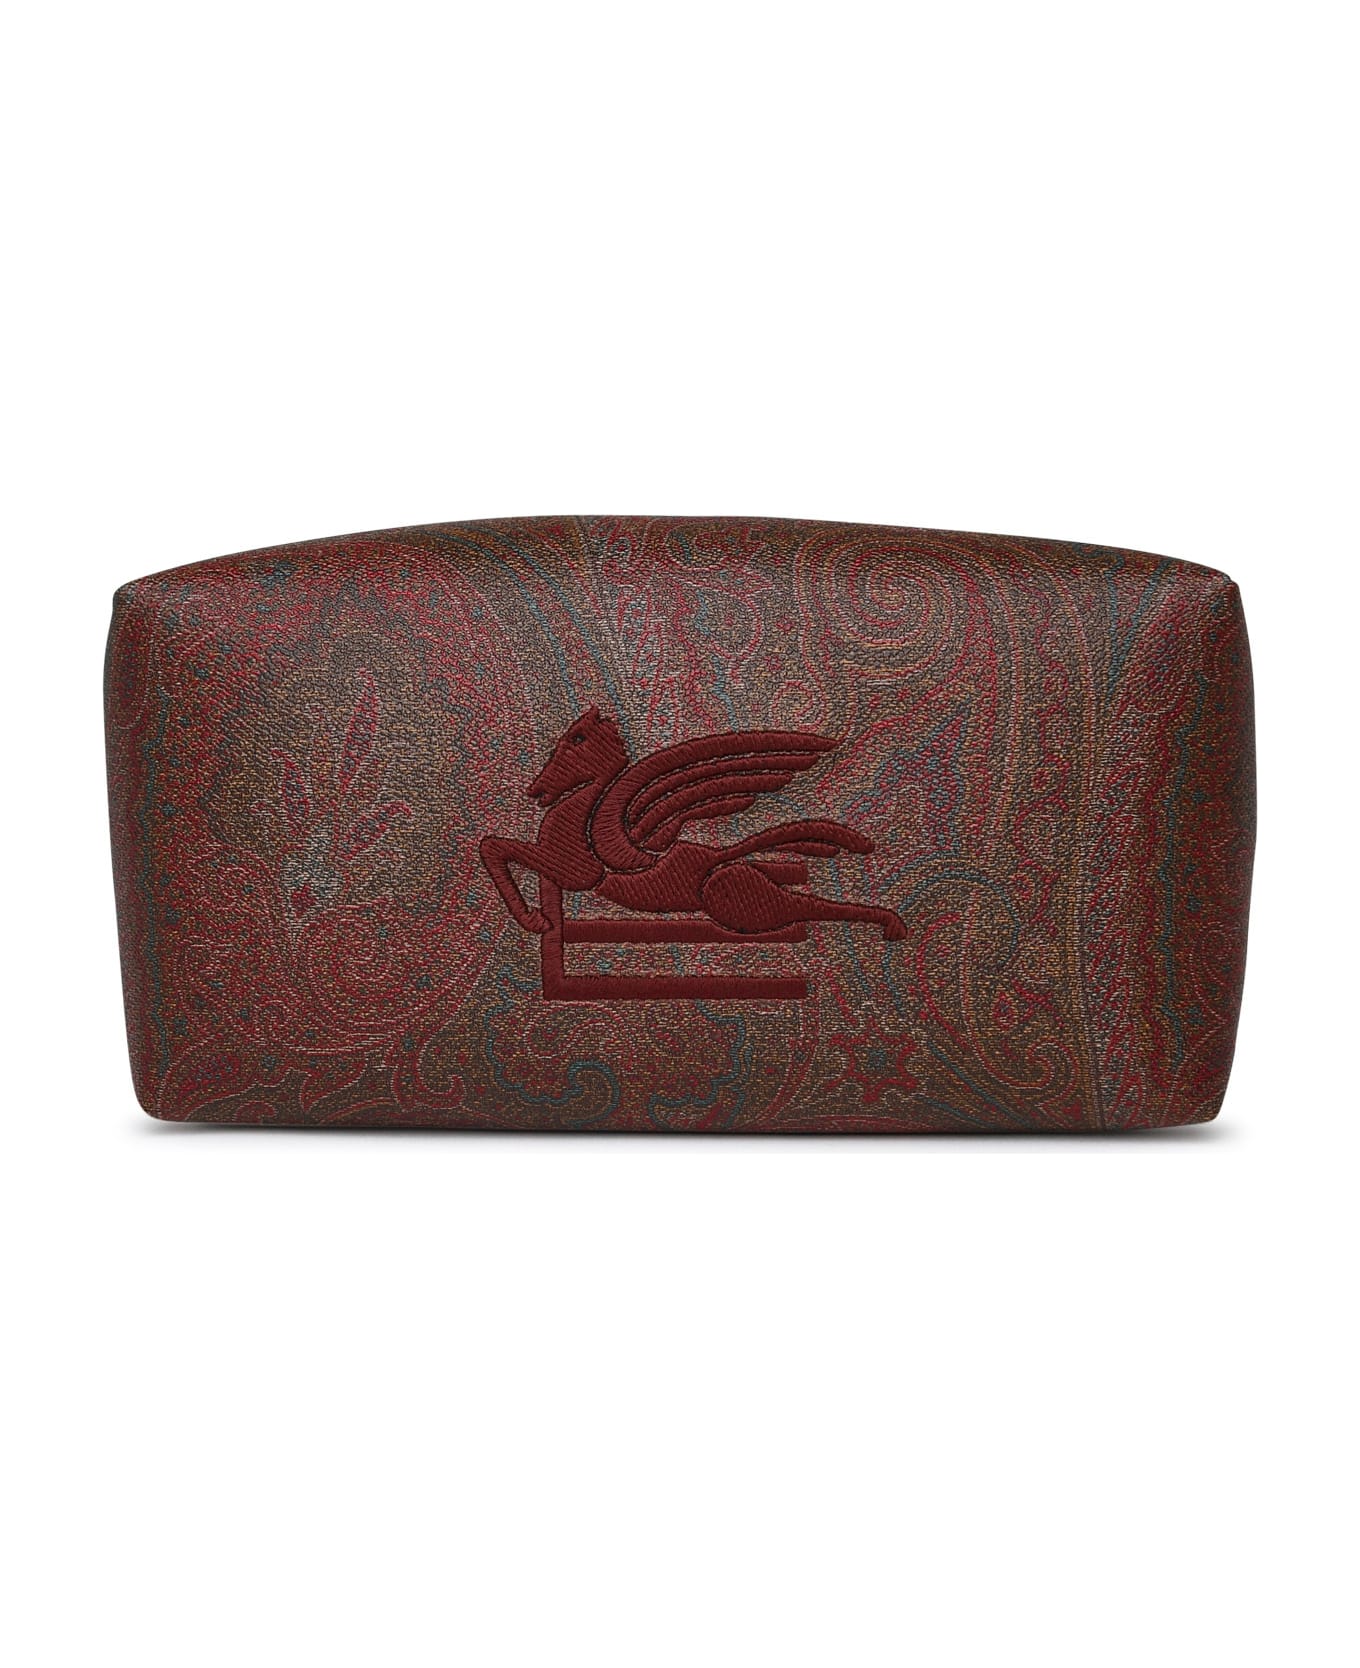 Etro Paisley Beauty Case In Brown Cotton Blend